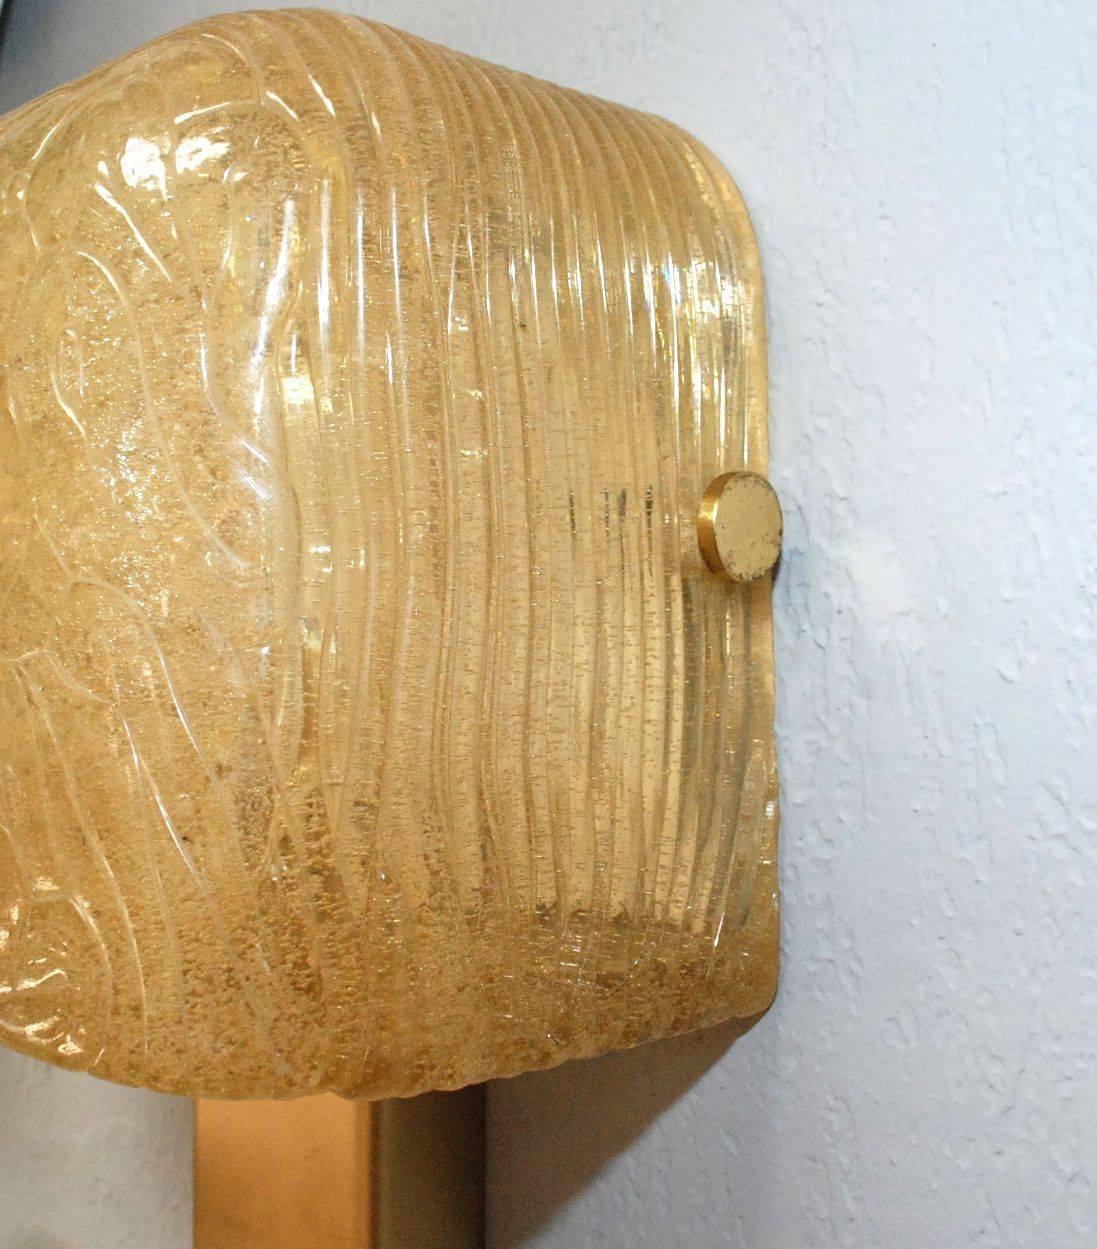 Vintage Modernist wall light with textured resin and painted metal by Aqua Signal / Made in Germany circa 1960s
1 light / E26 or E27 type / max 60W
Measures: Height 10.5 inches / width 12.5 inches / depth 5 inches
6 in stock in Palm Springs